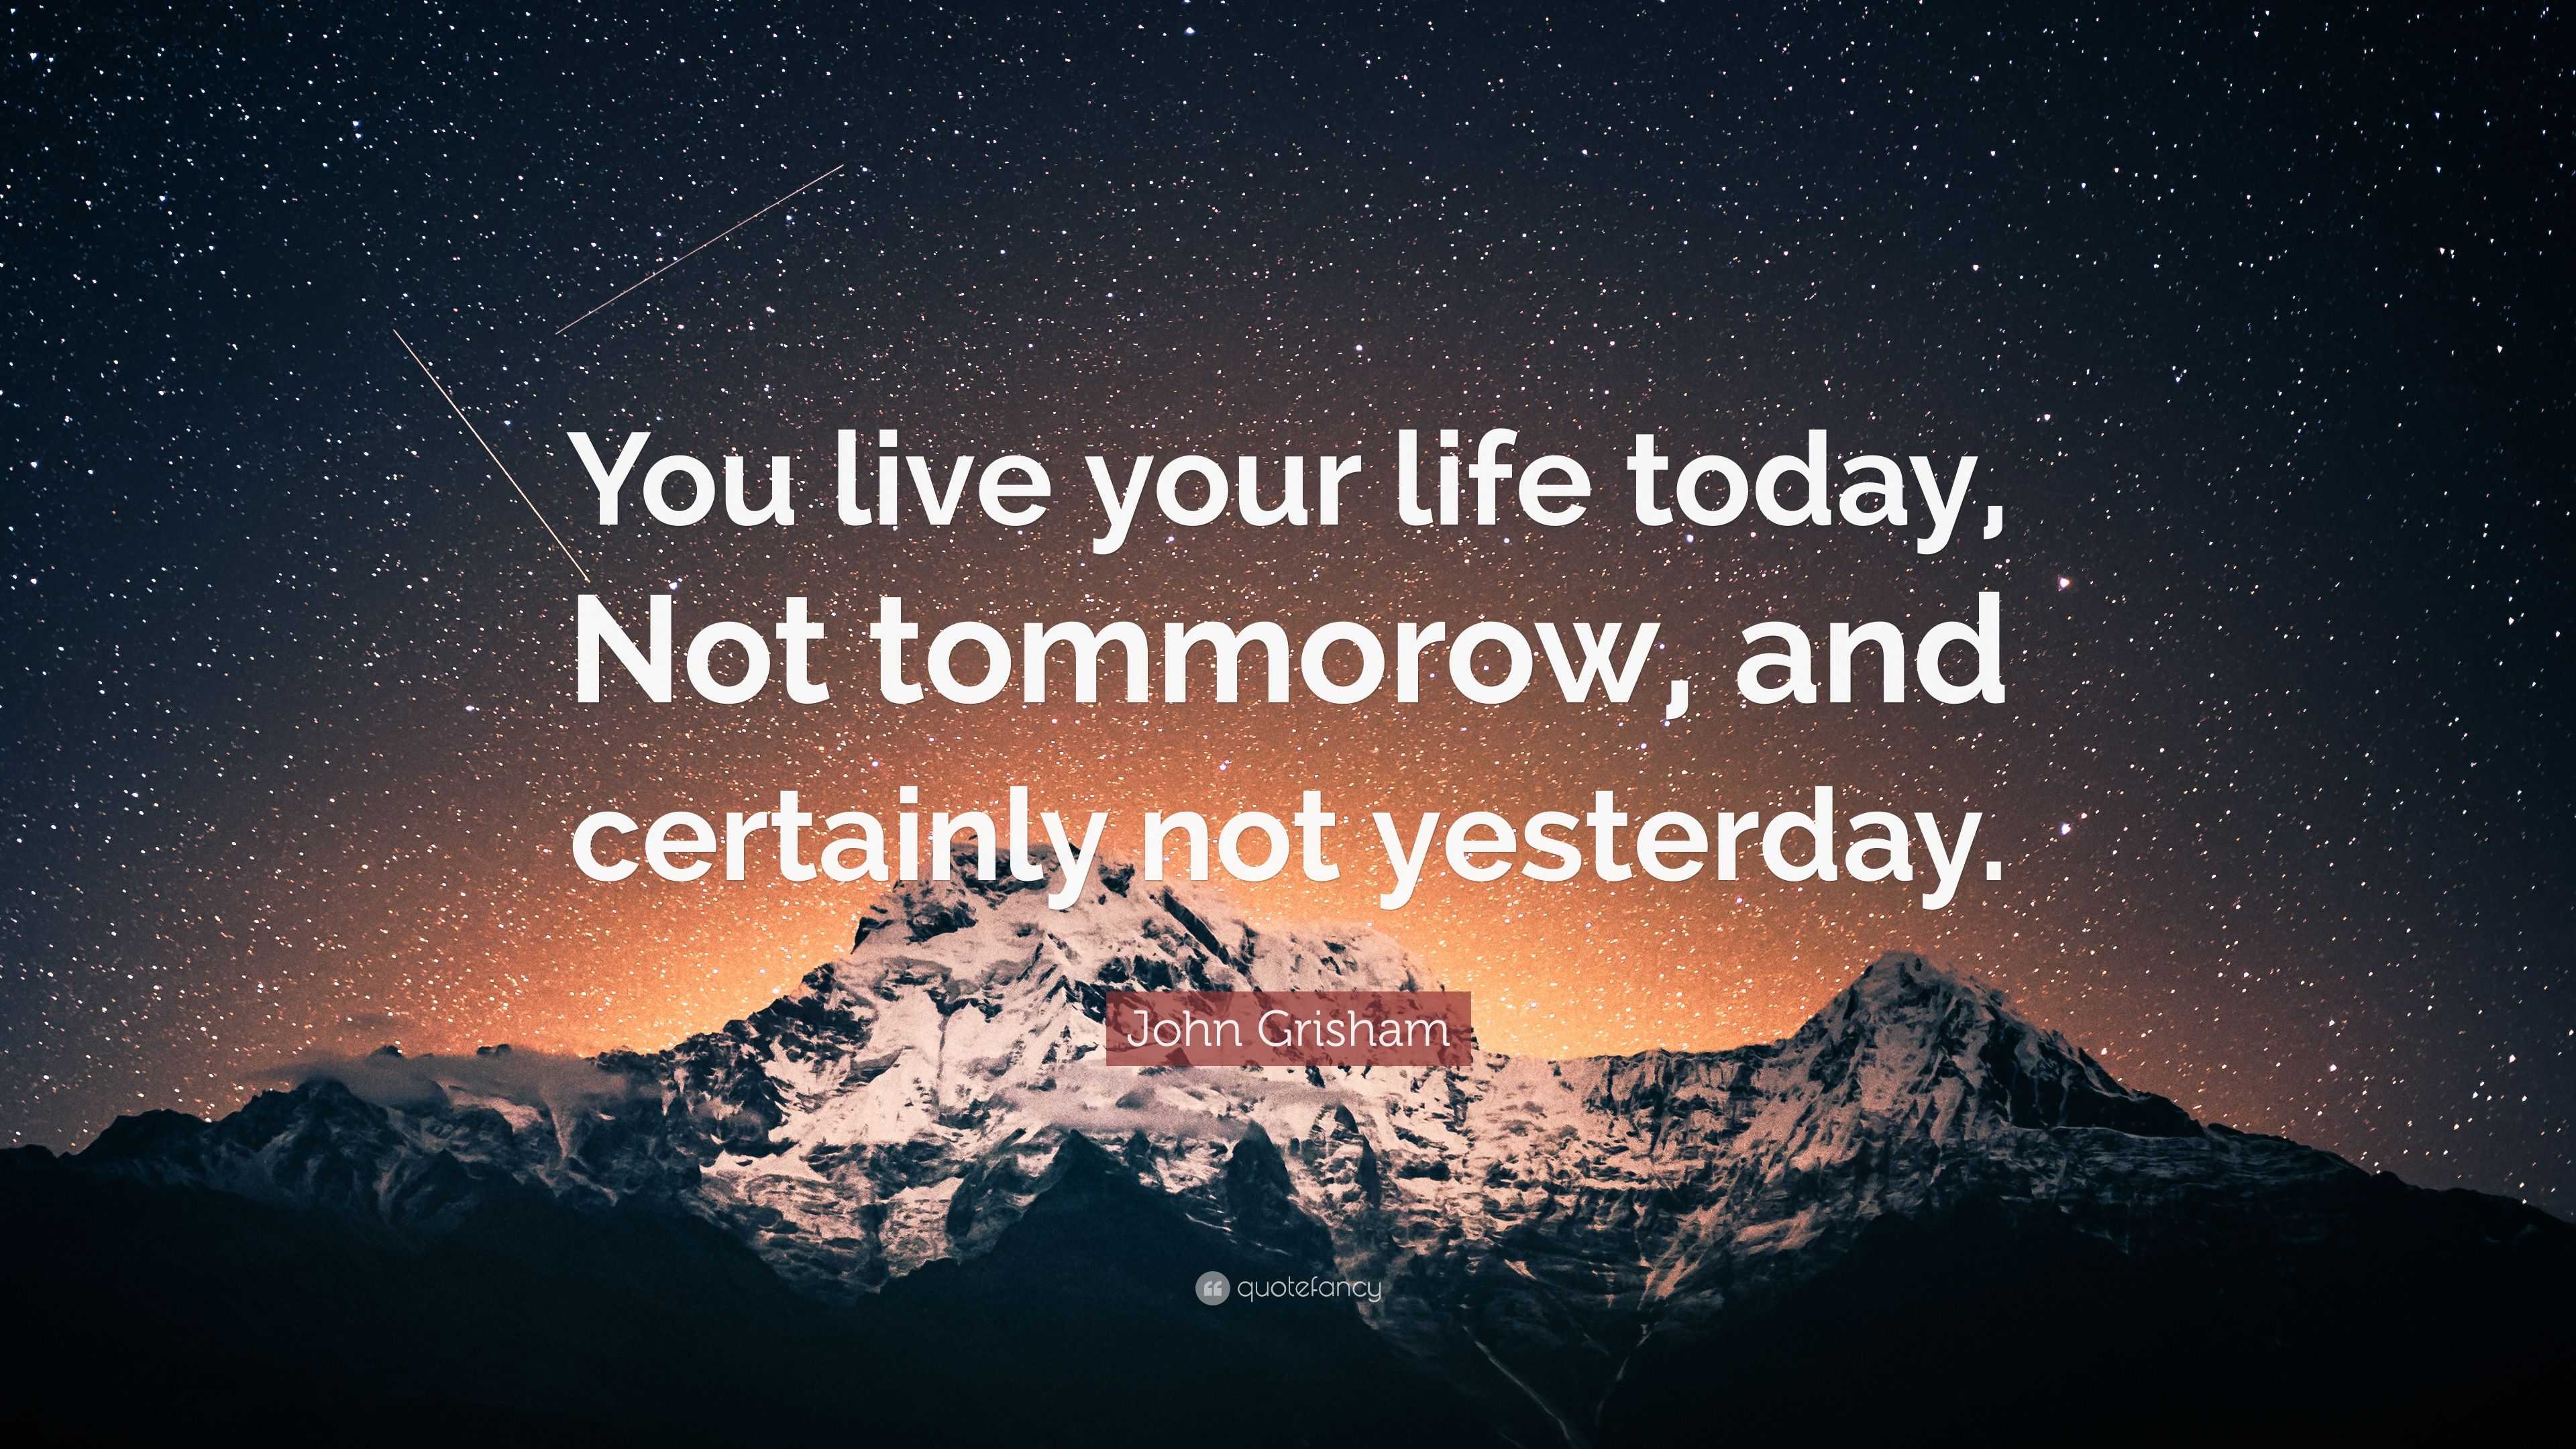 John Grisham Quote: “You live your life today, Not tommorow, and ...